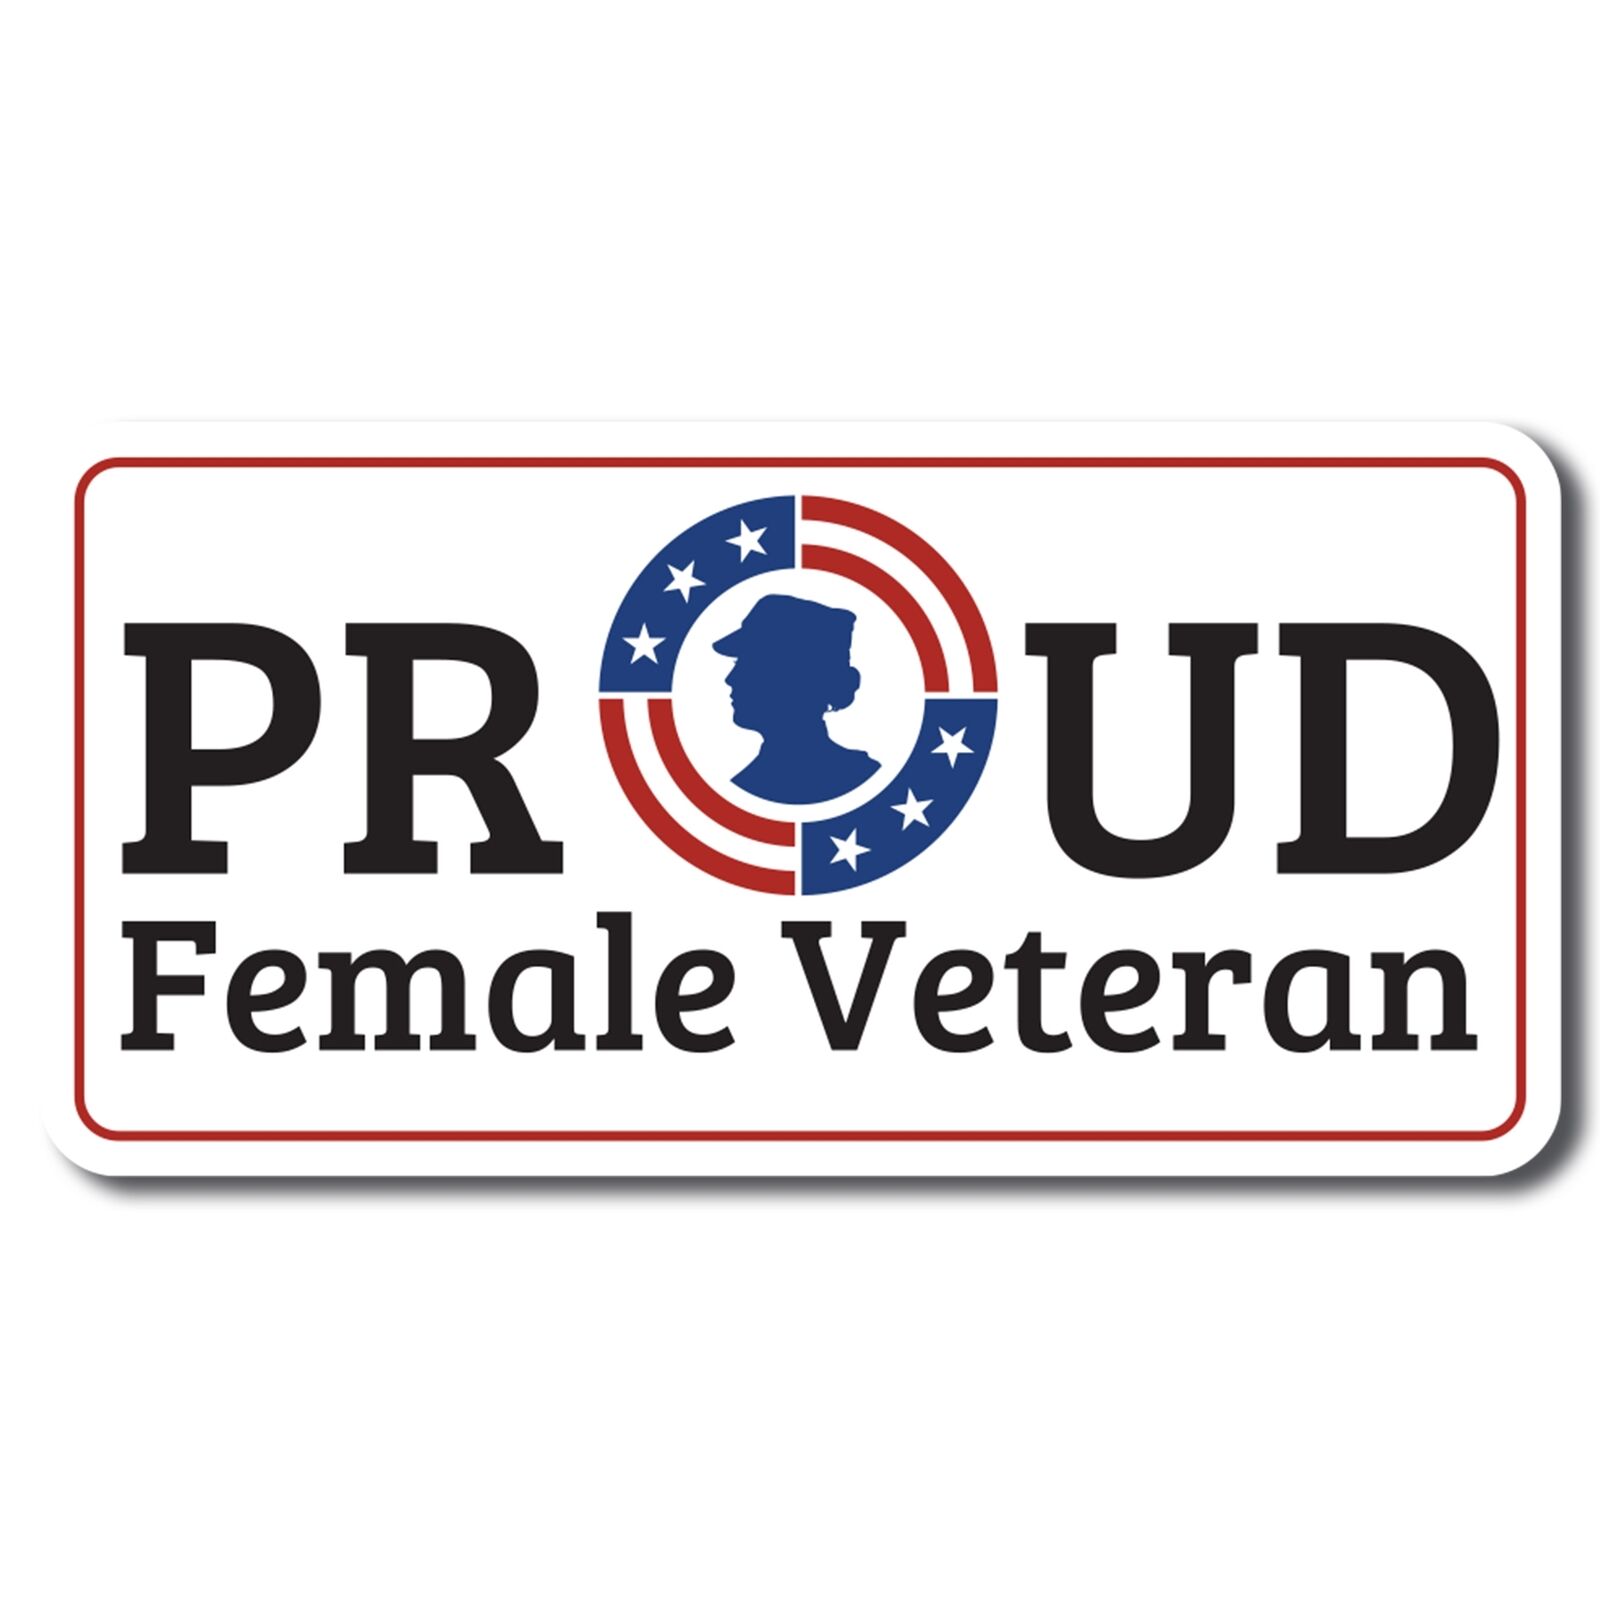 Magnet Me Up Proud Female Veteran Military Magnet Decal, 6.5x3 In, Service Women